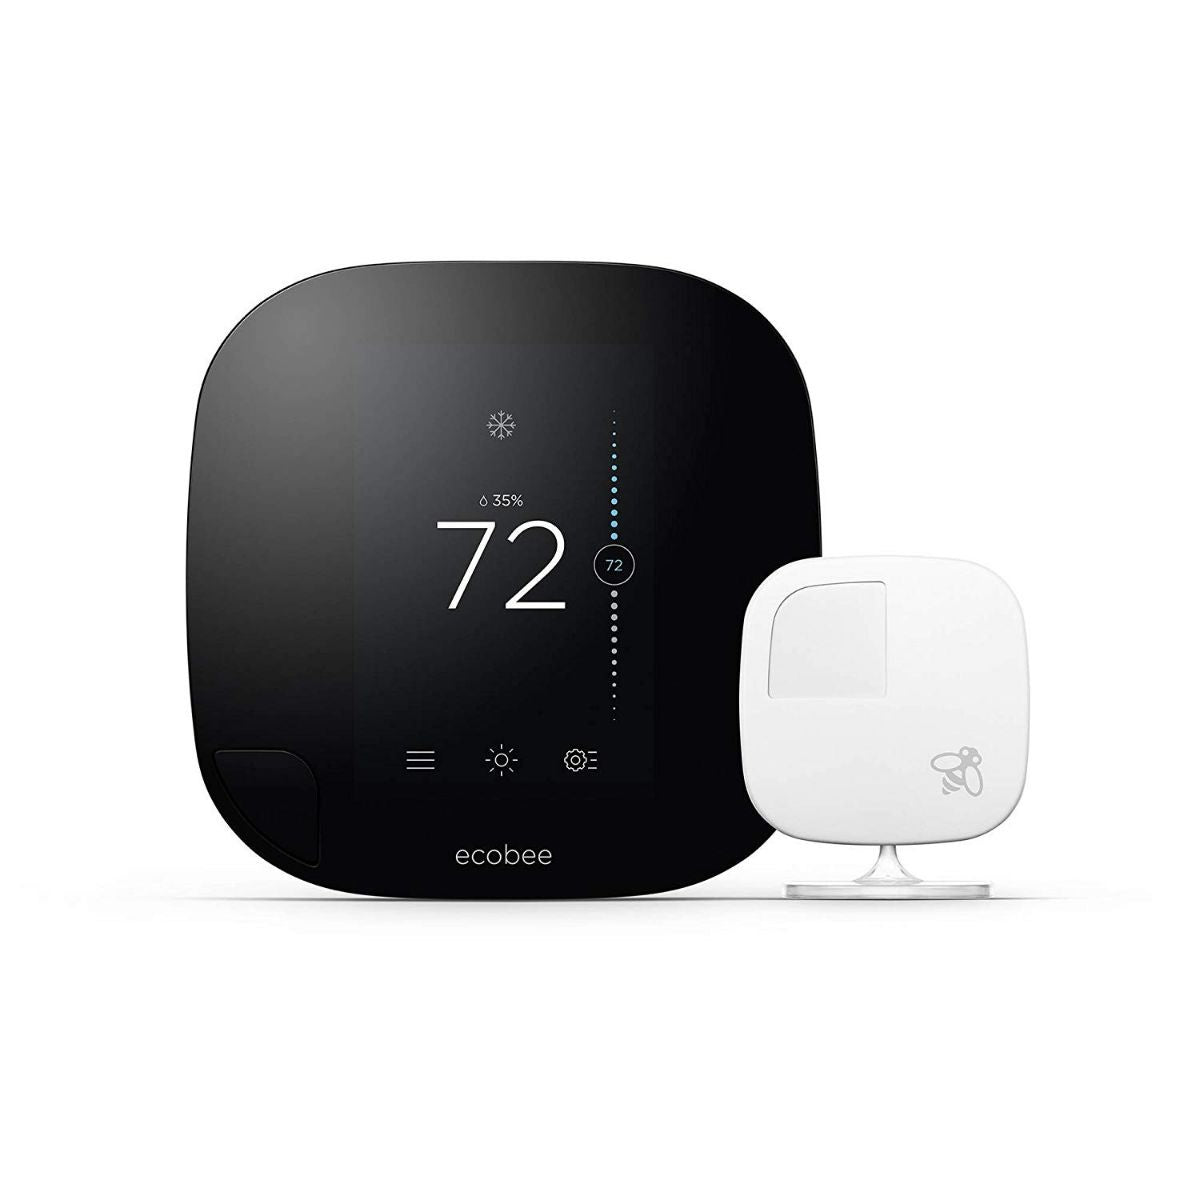 Ecobee3 Smart Wi-Fi Thermostat with Room Sensor - Black Heating, Cooling & Air - Programmable Thermostats ecobee    - Simple Cell Bulk Wholesale Pricing - USA Seller